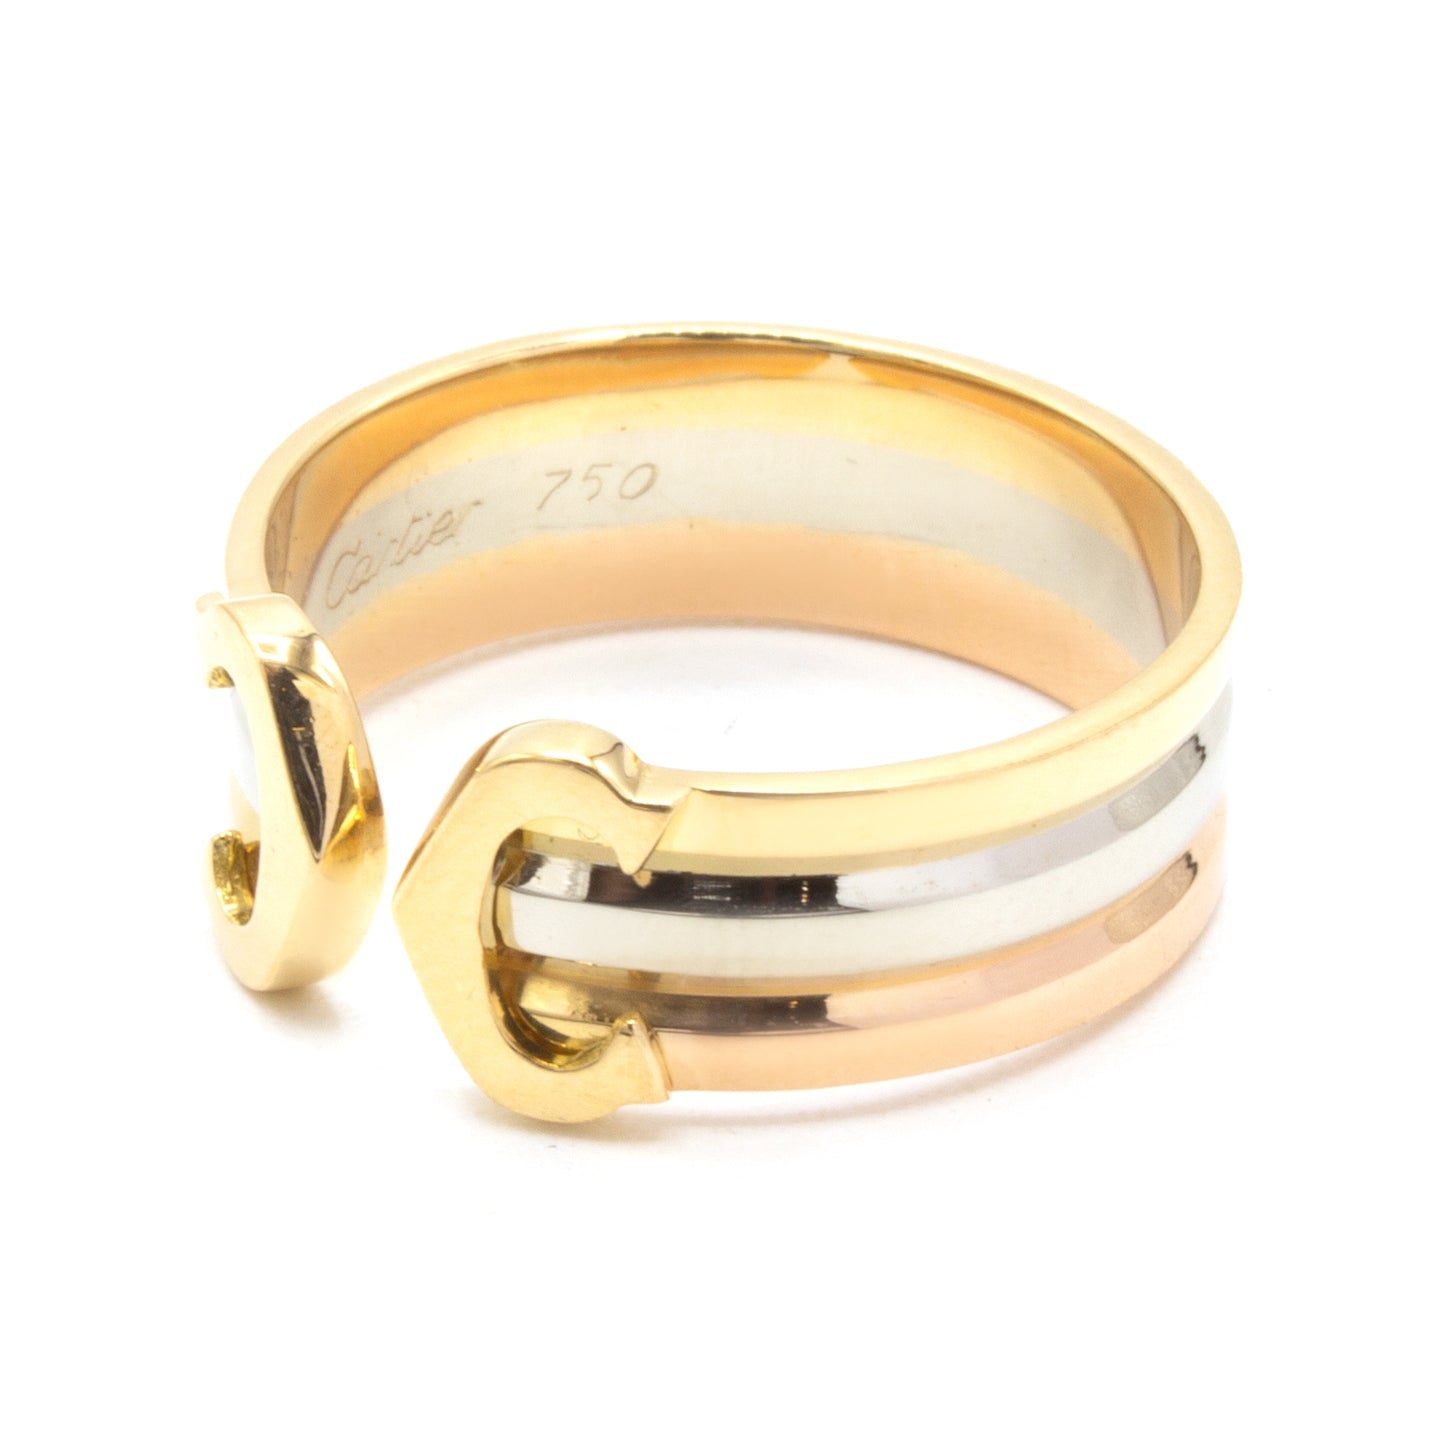 Cartier Double C ring